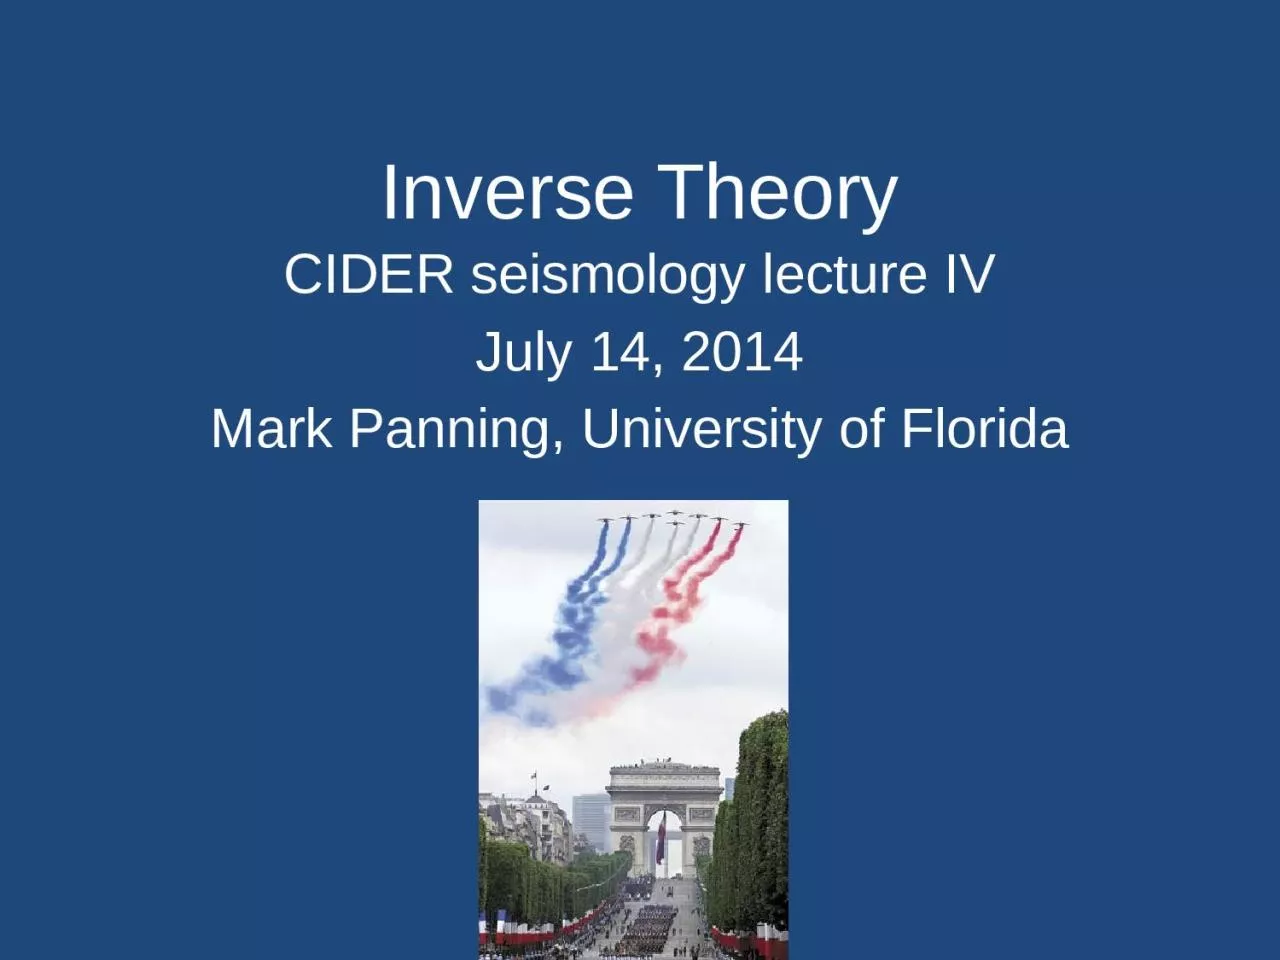 Inverse Theory CIDER seismology lecture IV